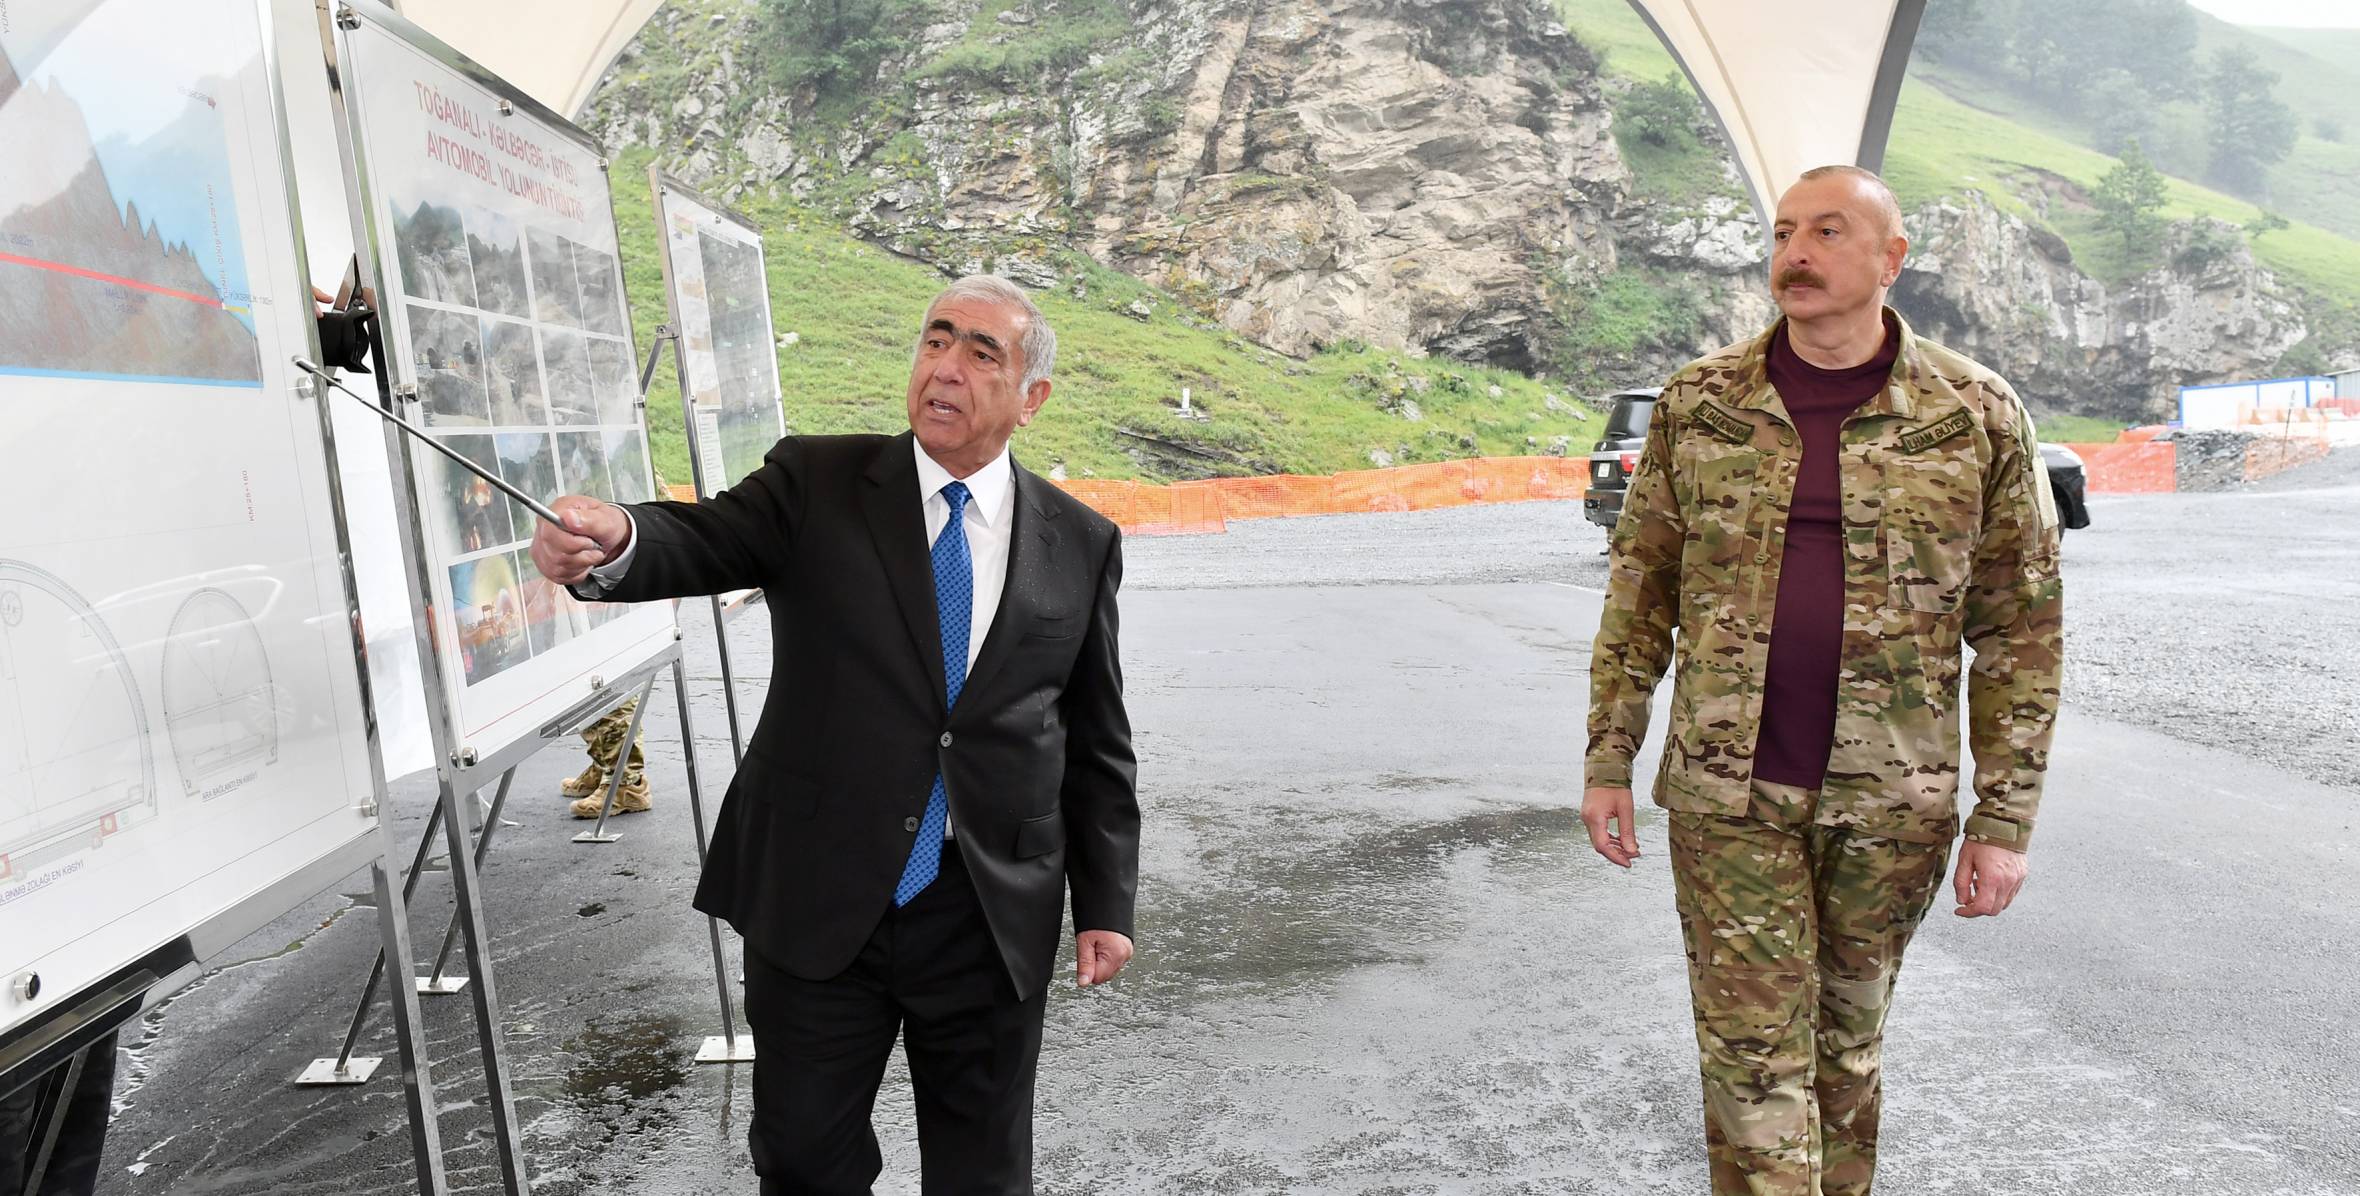 Ilham Aliyev viewed the construction of two tunnels in the Goygol district